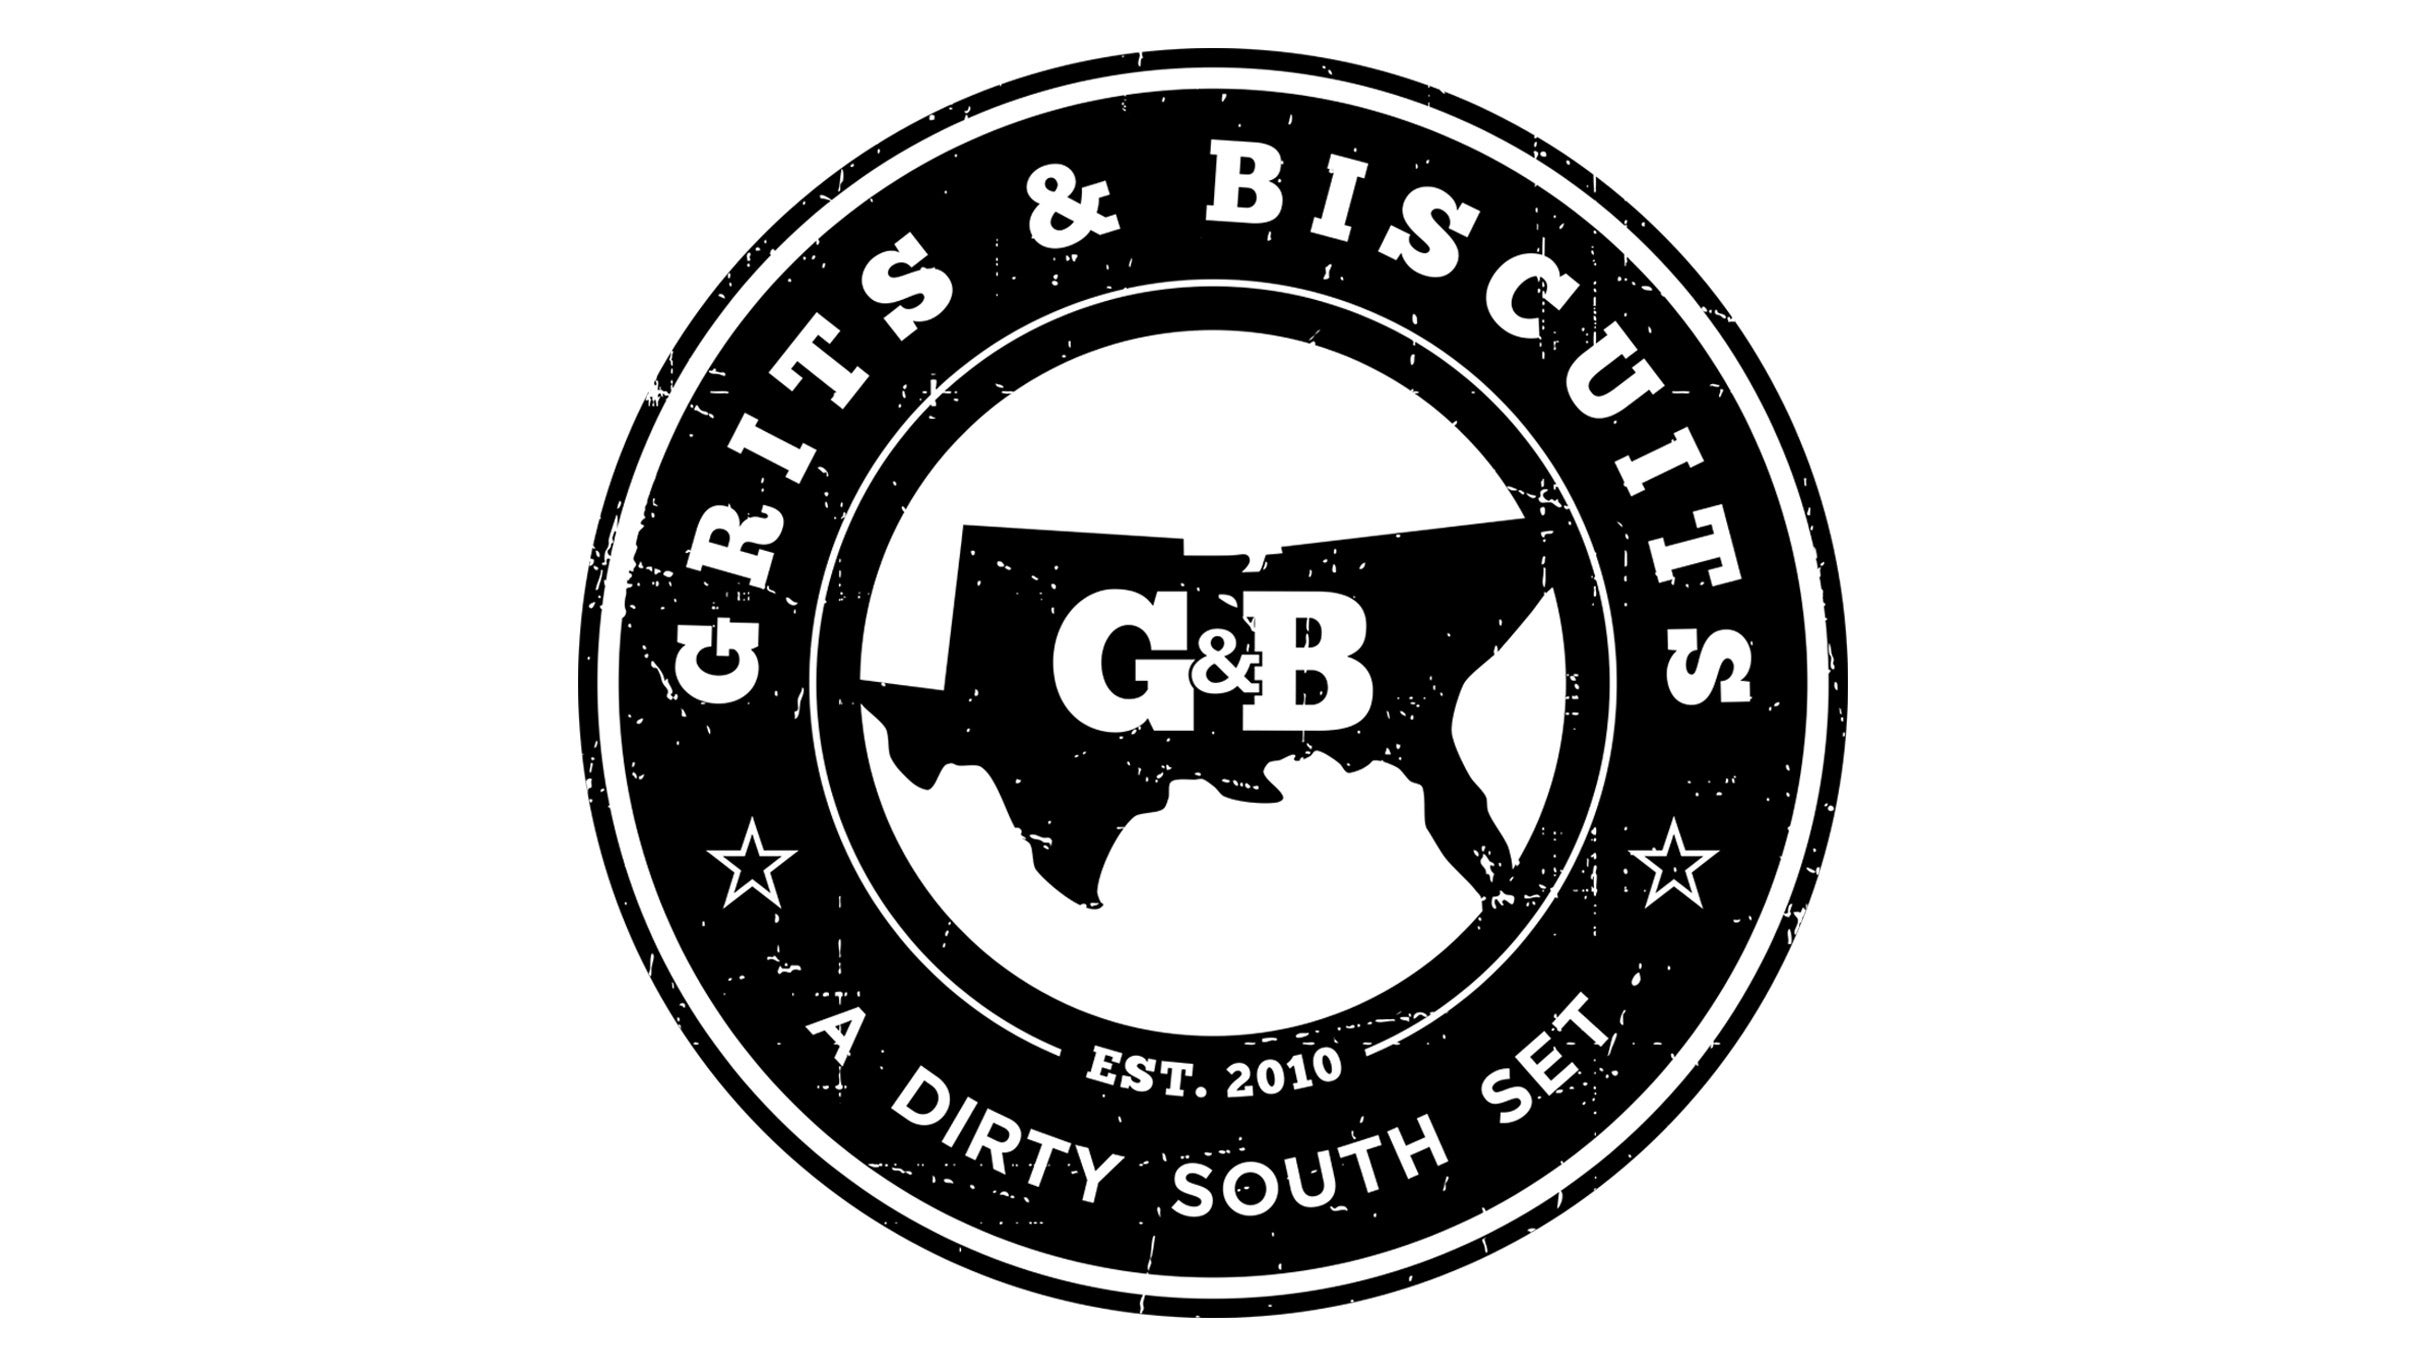 Grits & Biscuits in Chicago promo photo for Citi® Cardmember Preferred presale offer code